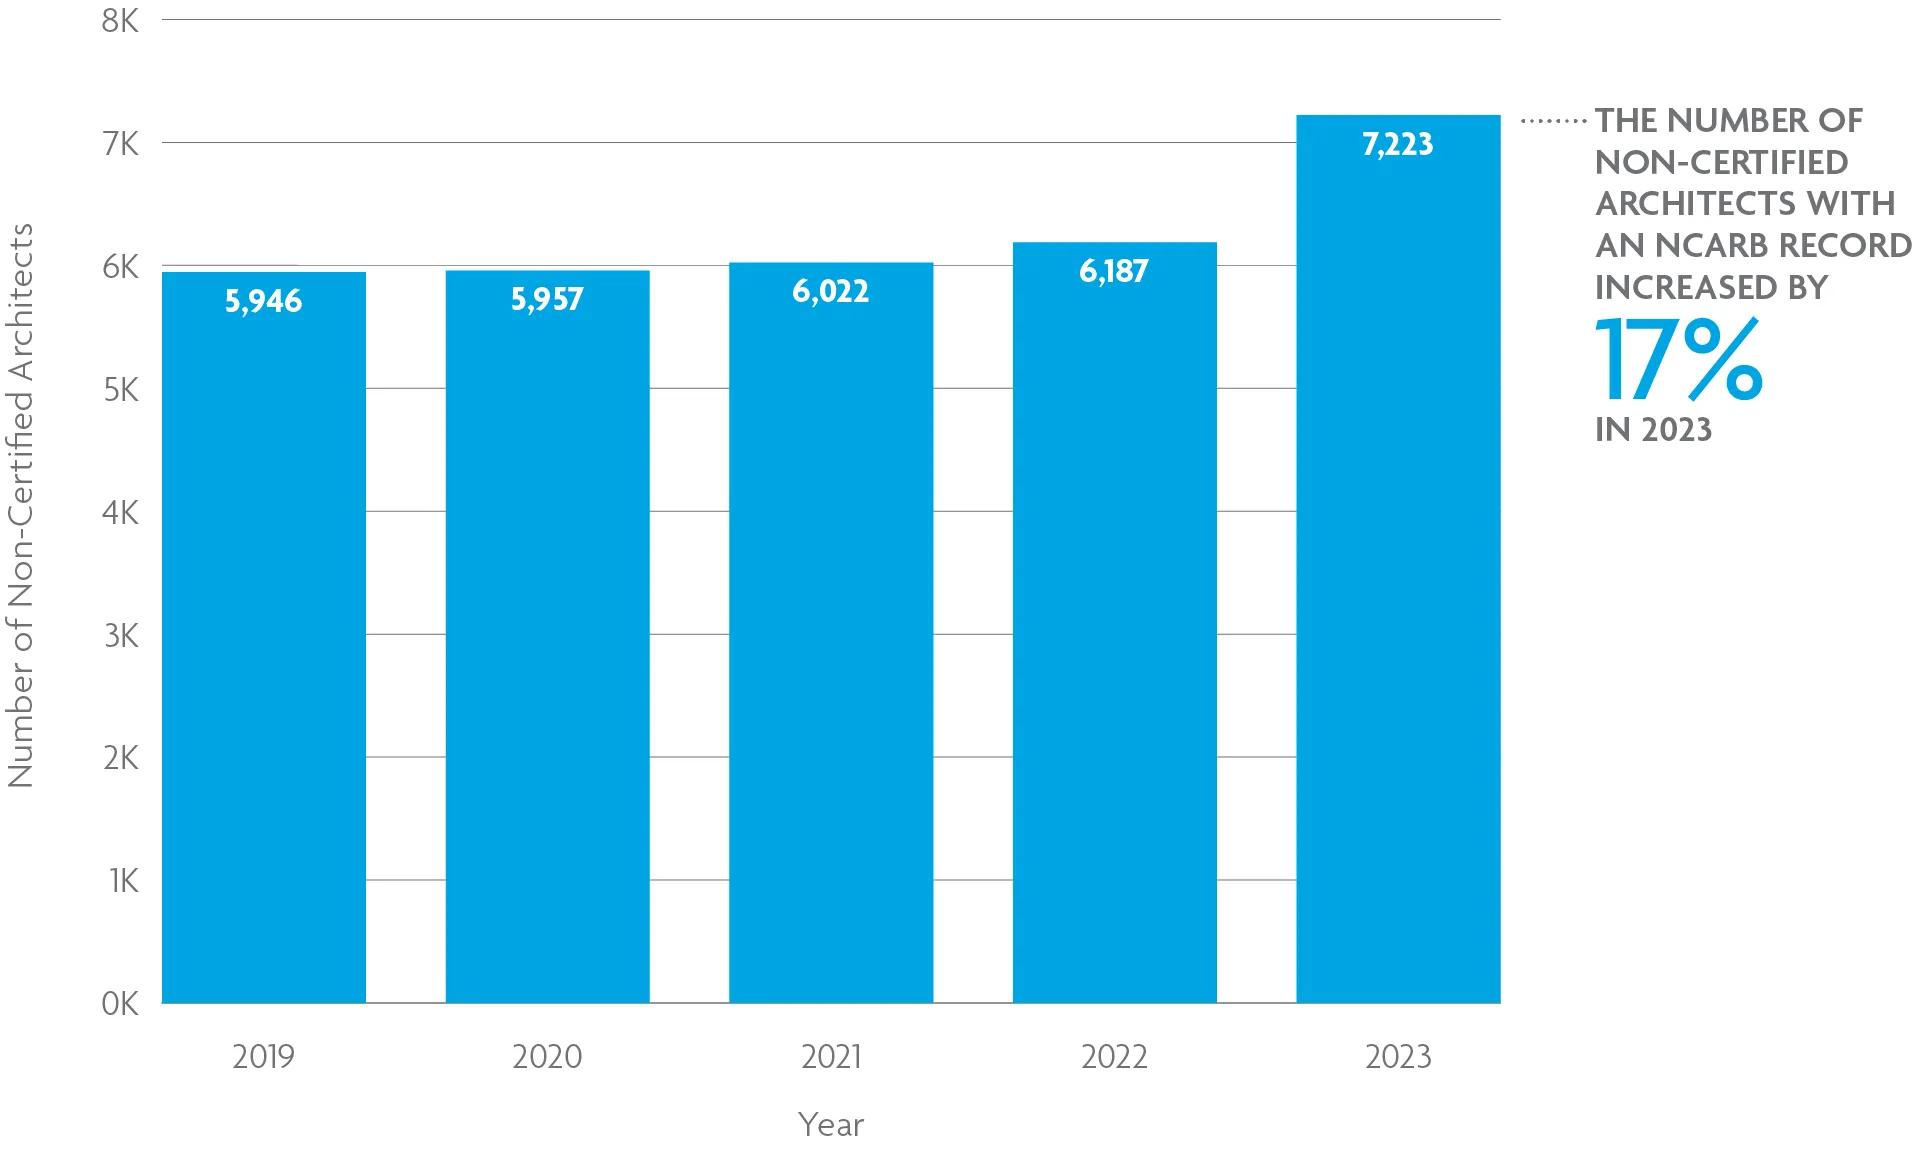 A bar chart shows that the number of non-certified architects with an NCARB Record rose to 7,223 in 2023, a 17% increase. For help with data accessibility, contact communications@ncarb.org.